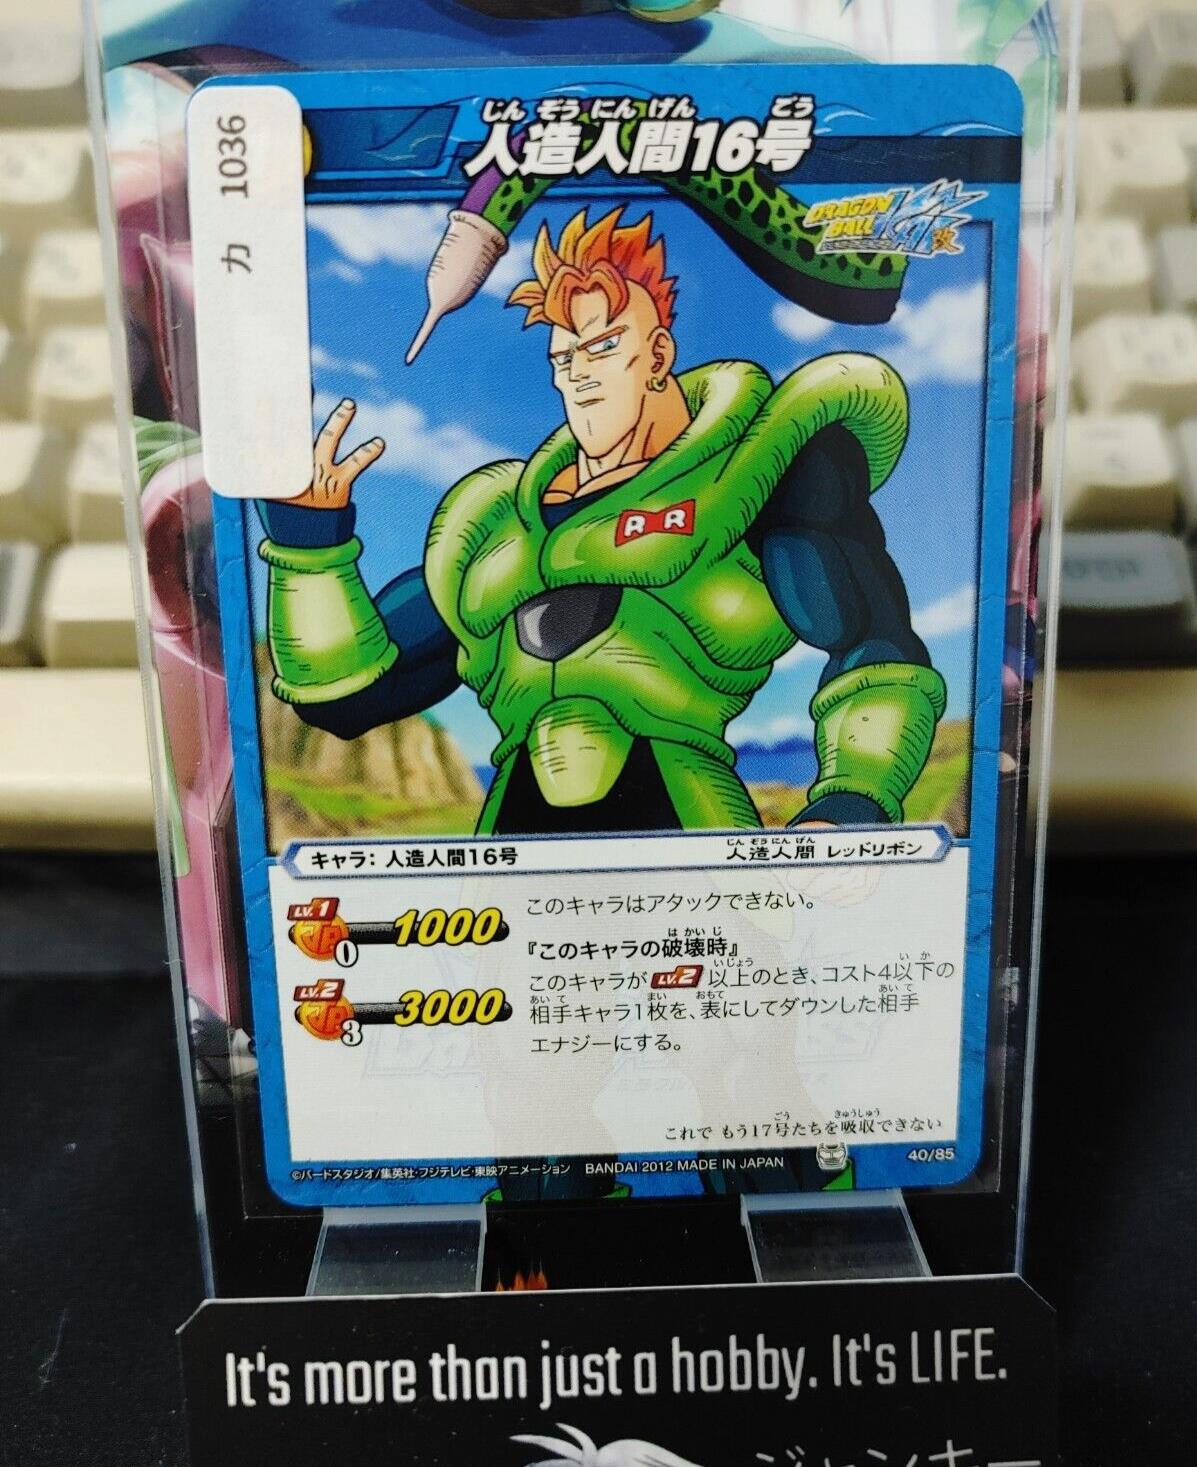 Dragon Ball Z Bandai Carddass Miracle Battle Android 16 40/85 Japanese Vintage